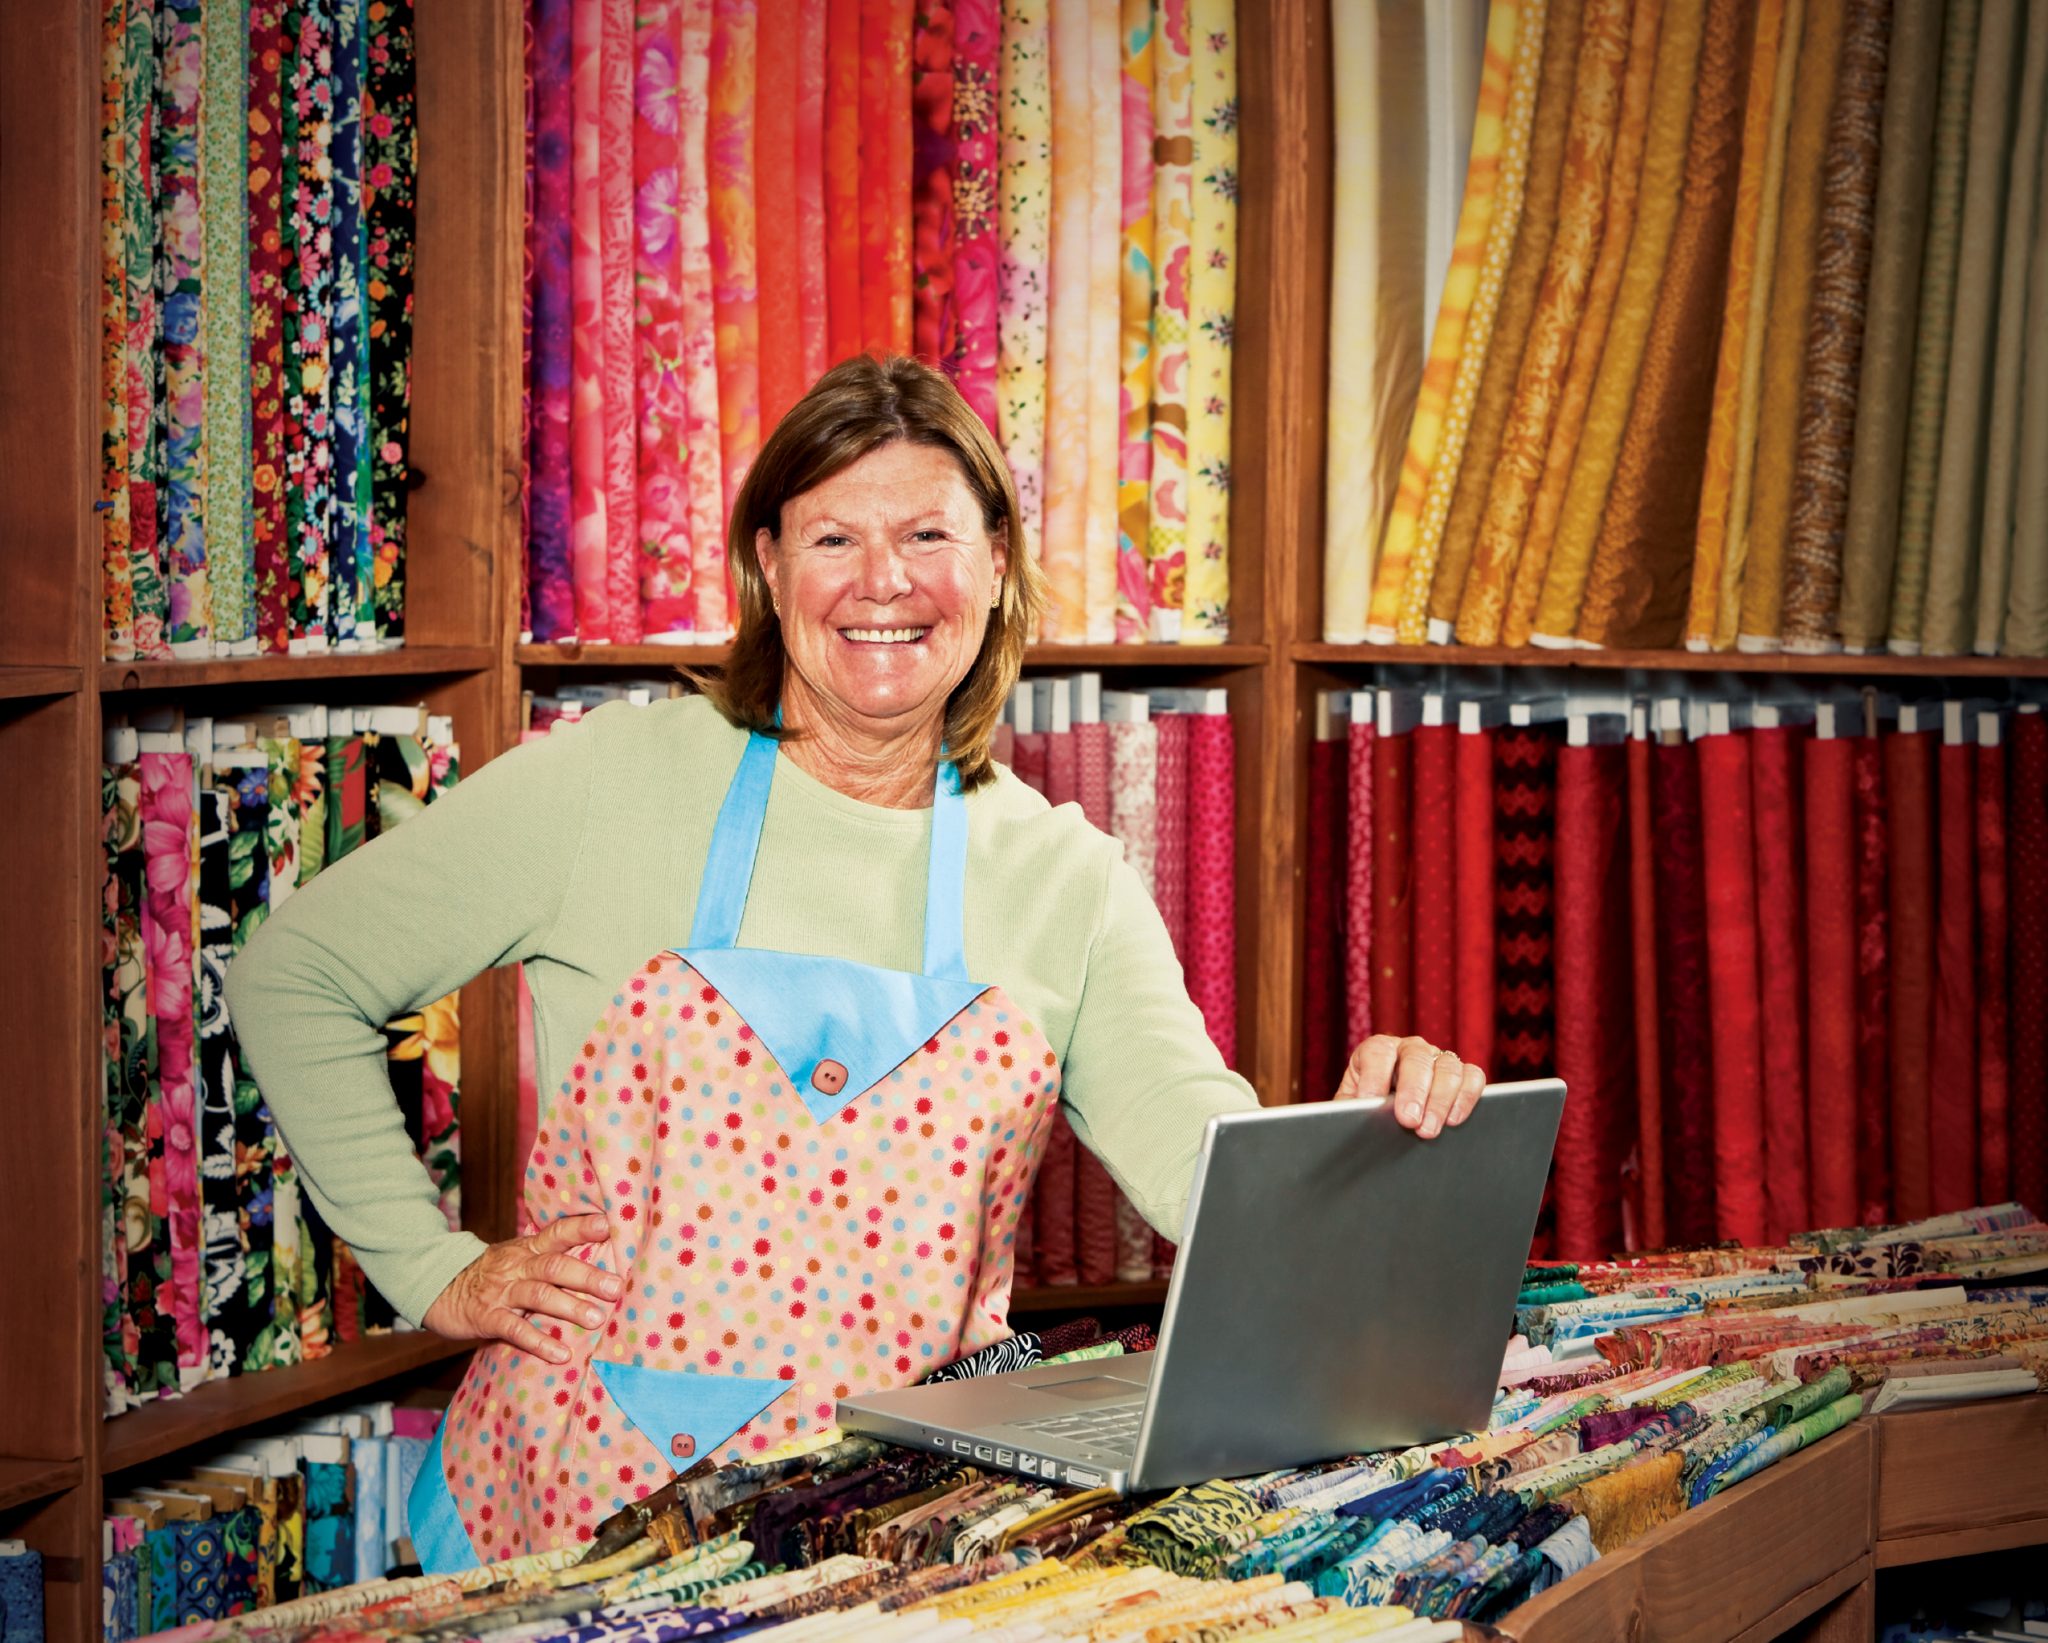 A Quilt Shop Owner uses her laptop at her store surrounded by bolts of fabric